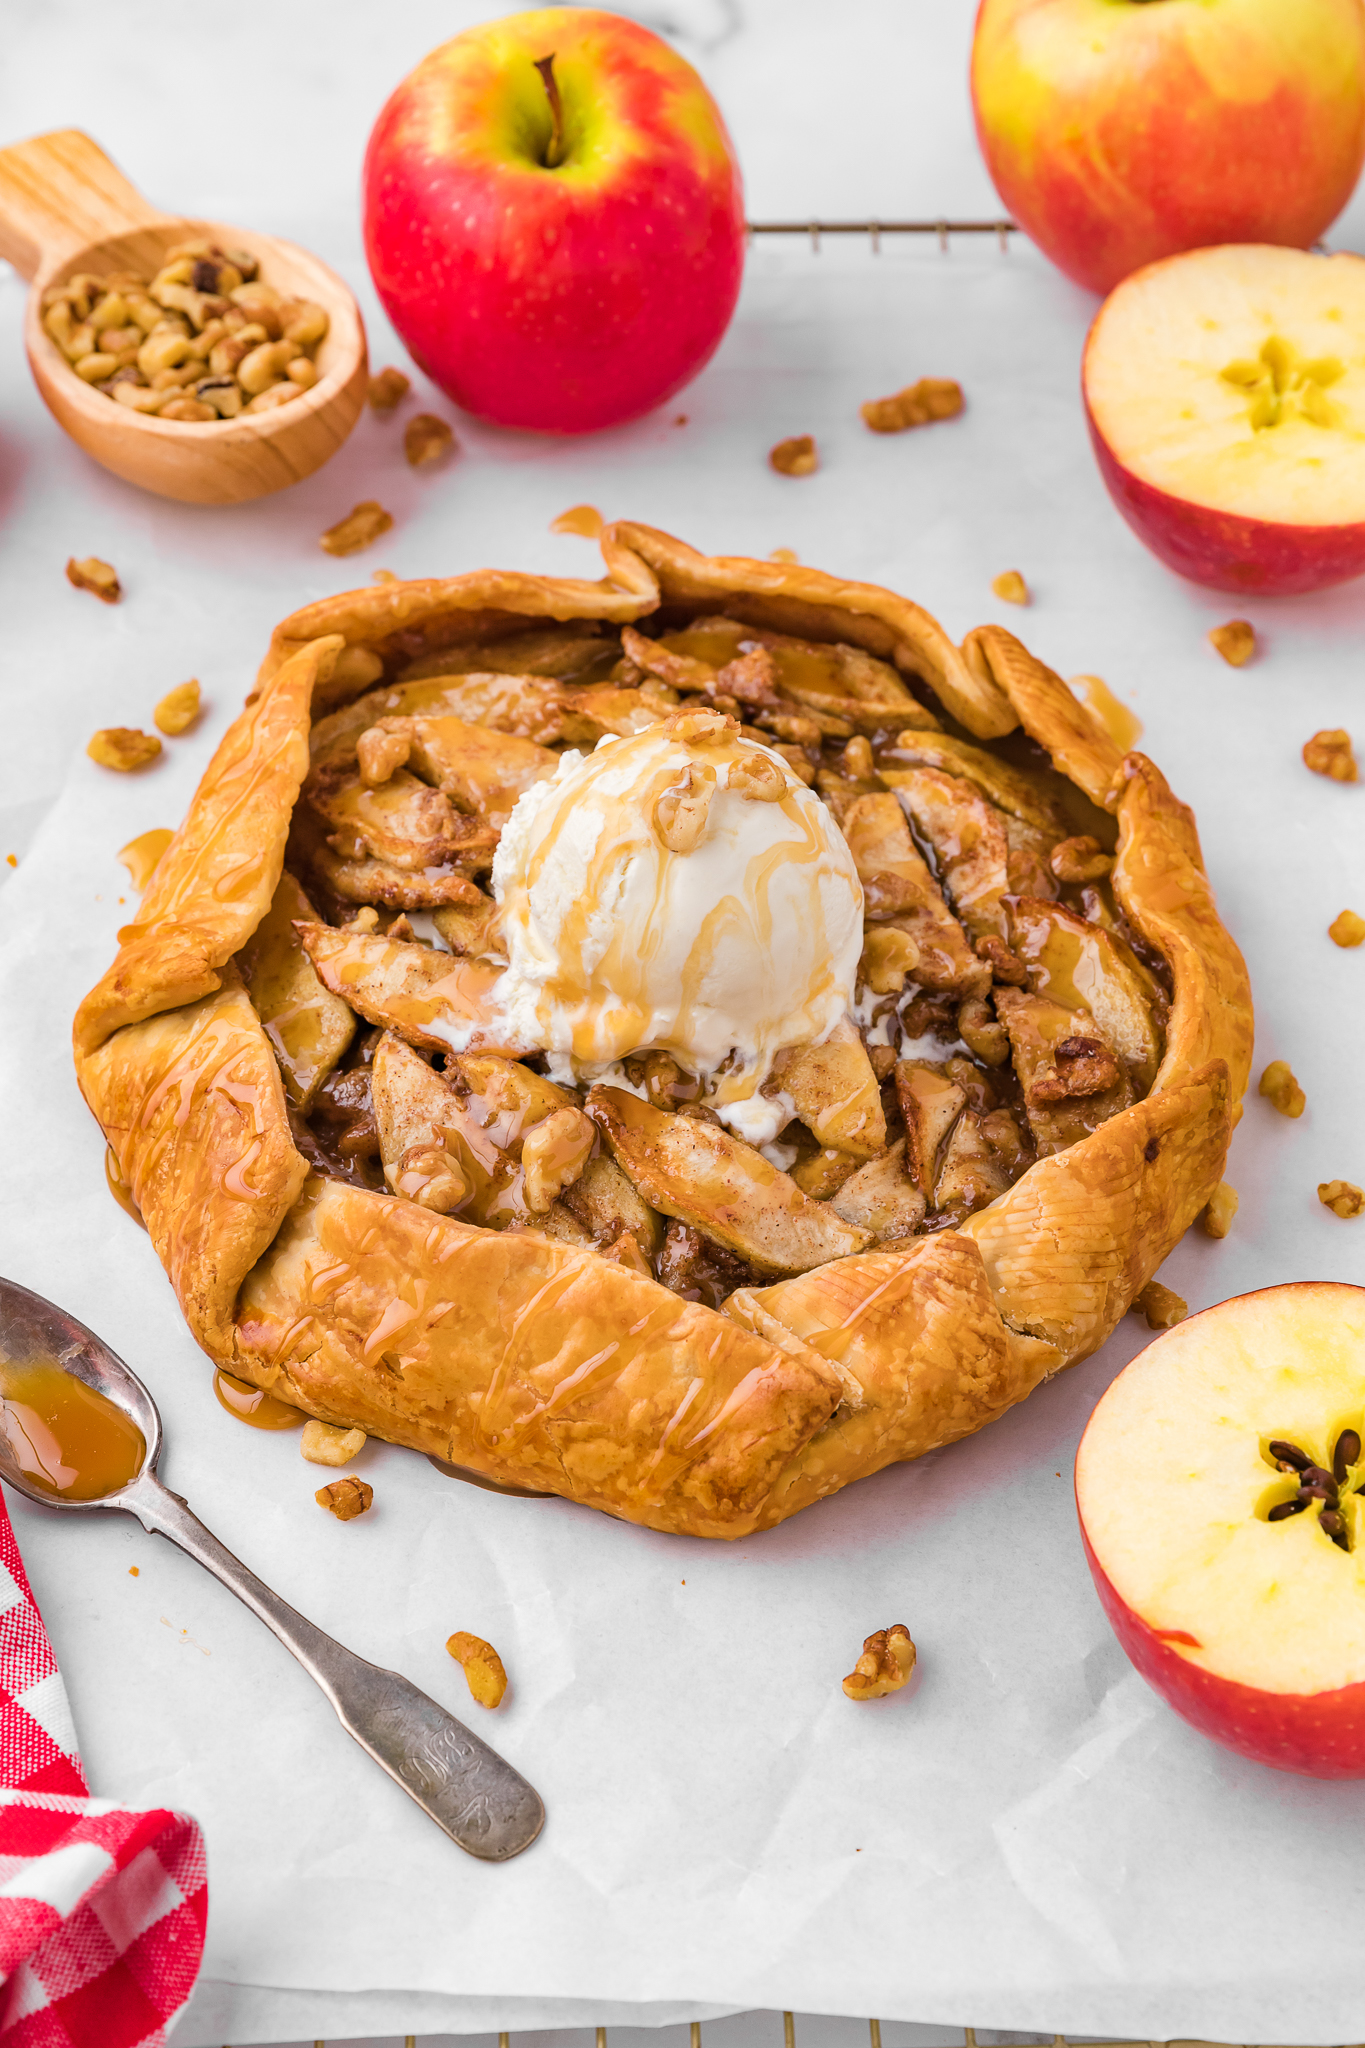 whole apple crostata topped with ice-cream and caramel